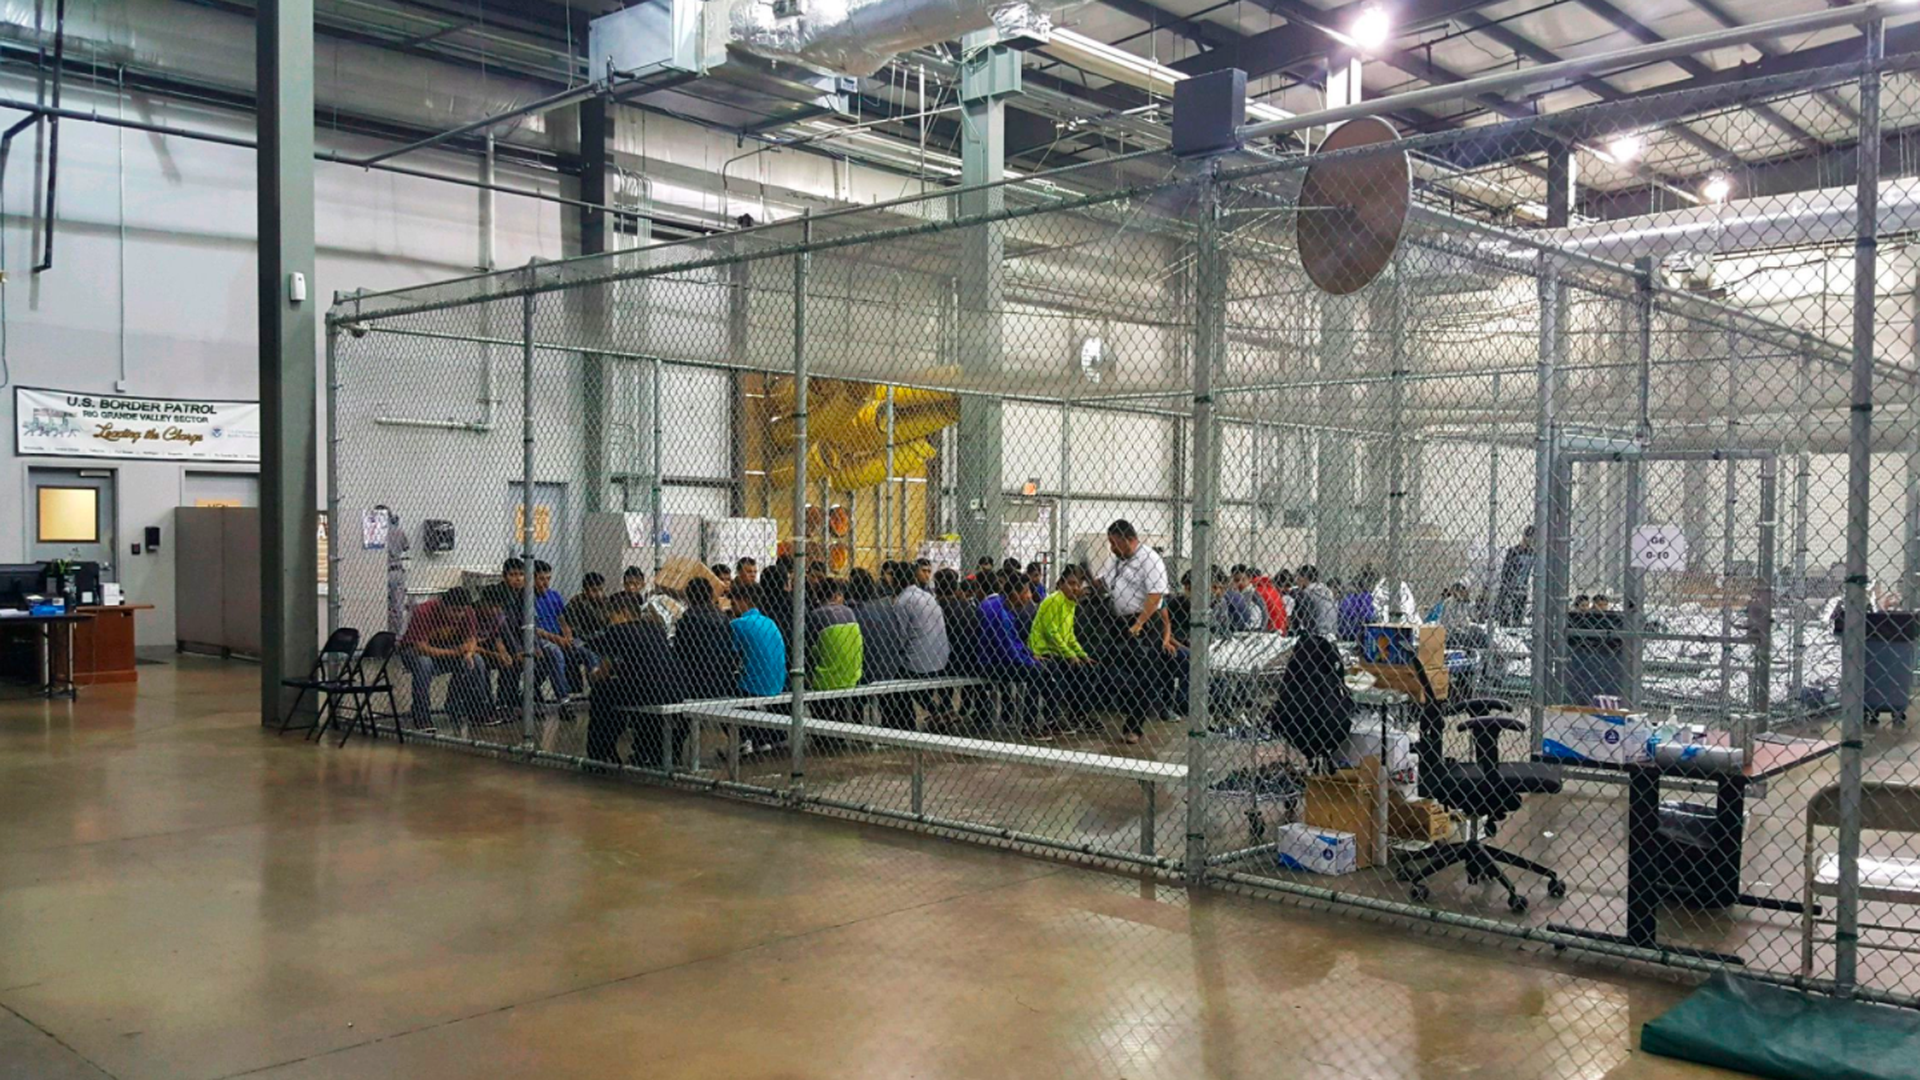 People stand inside a cage made with chain-link fences